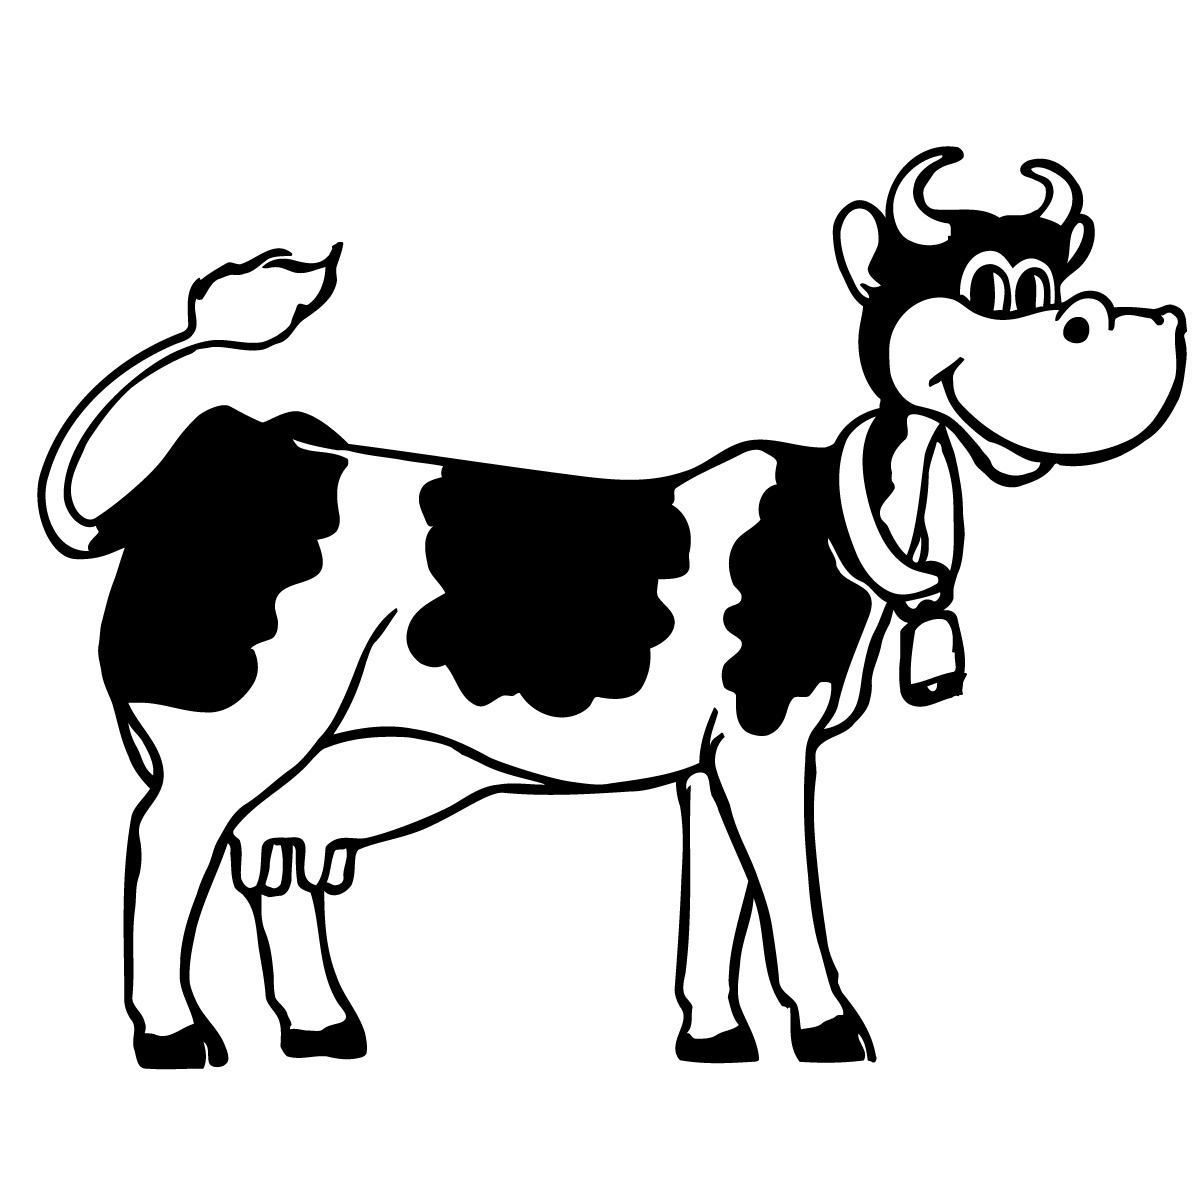 Cartoon Drawings Of Cows - ClipArt Best - ClipArt Best